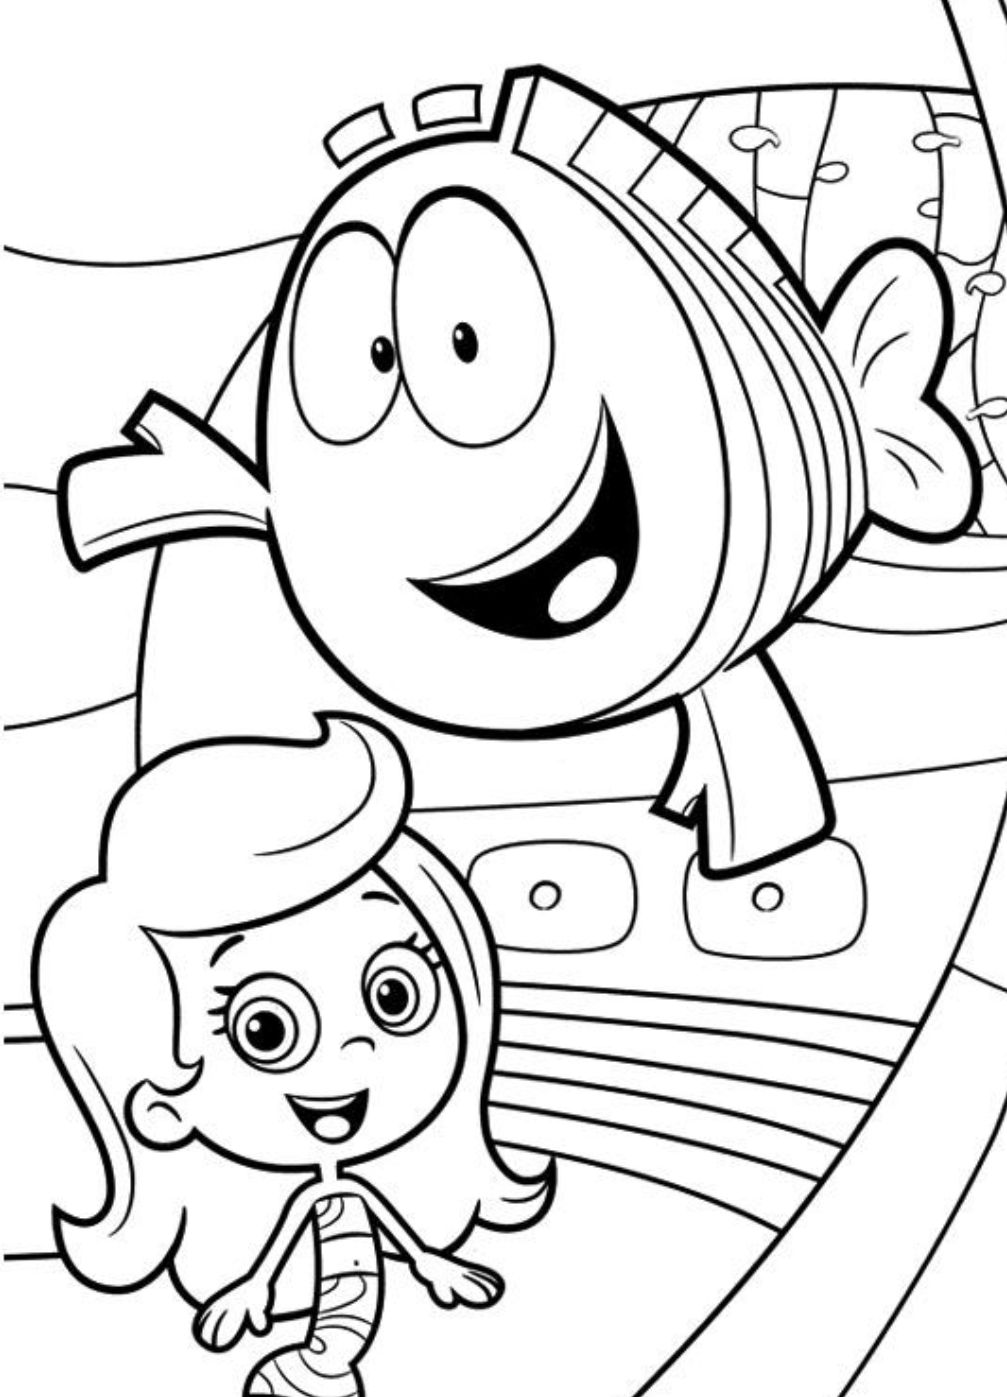 Molly bubble guppies coloring pages download and print for free